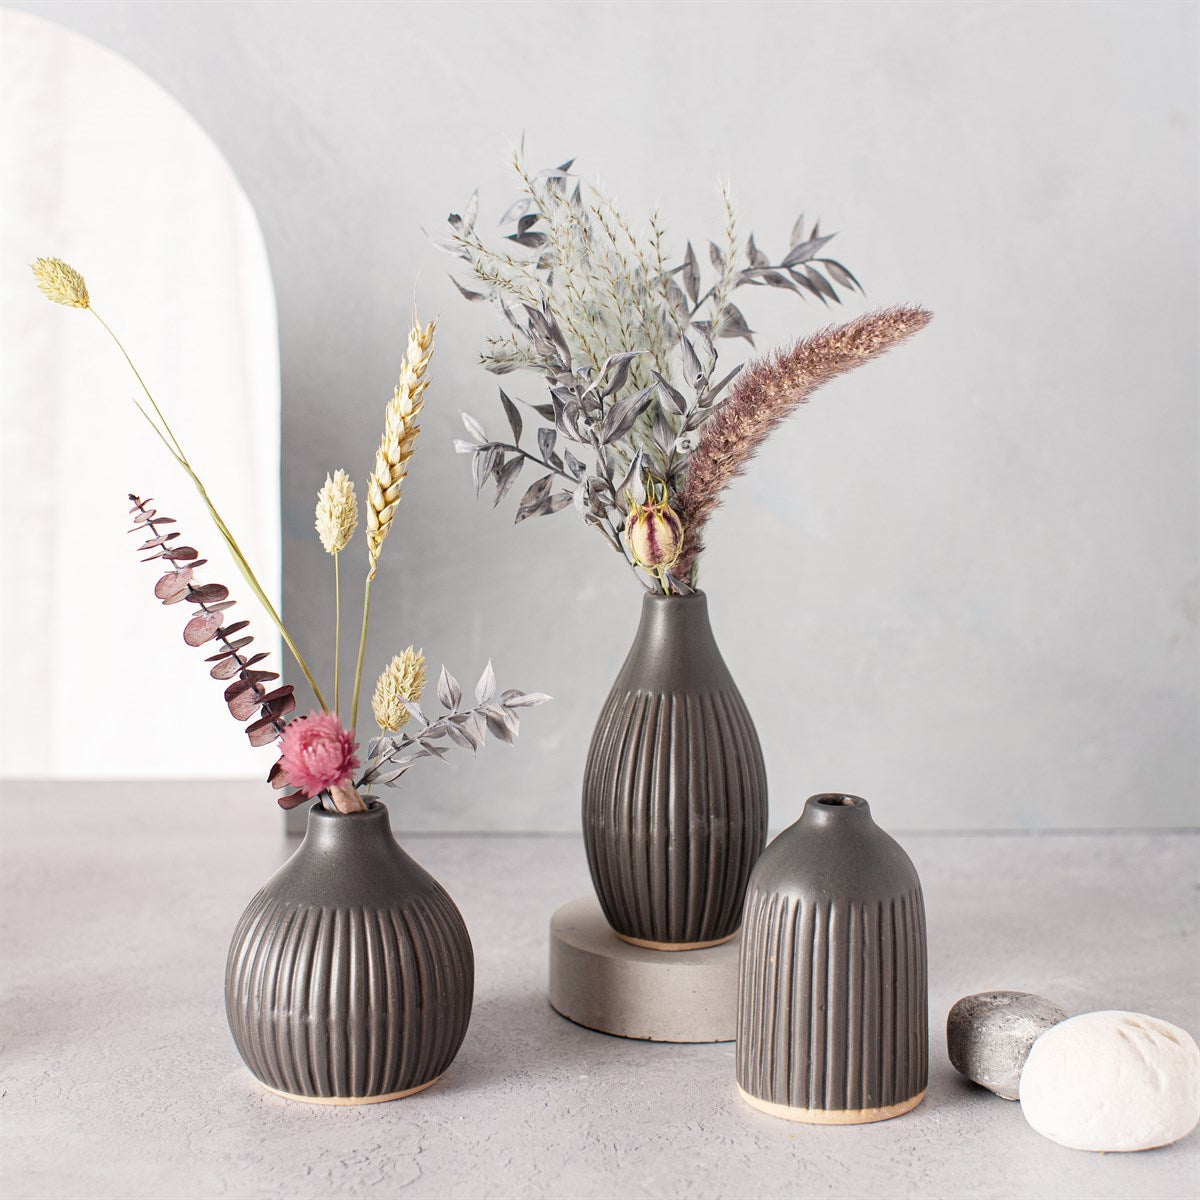 Black Grooved Bud Vases - Set Of 3 with dried flowers arranged